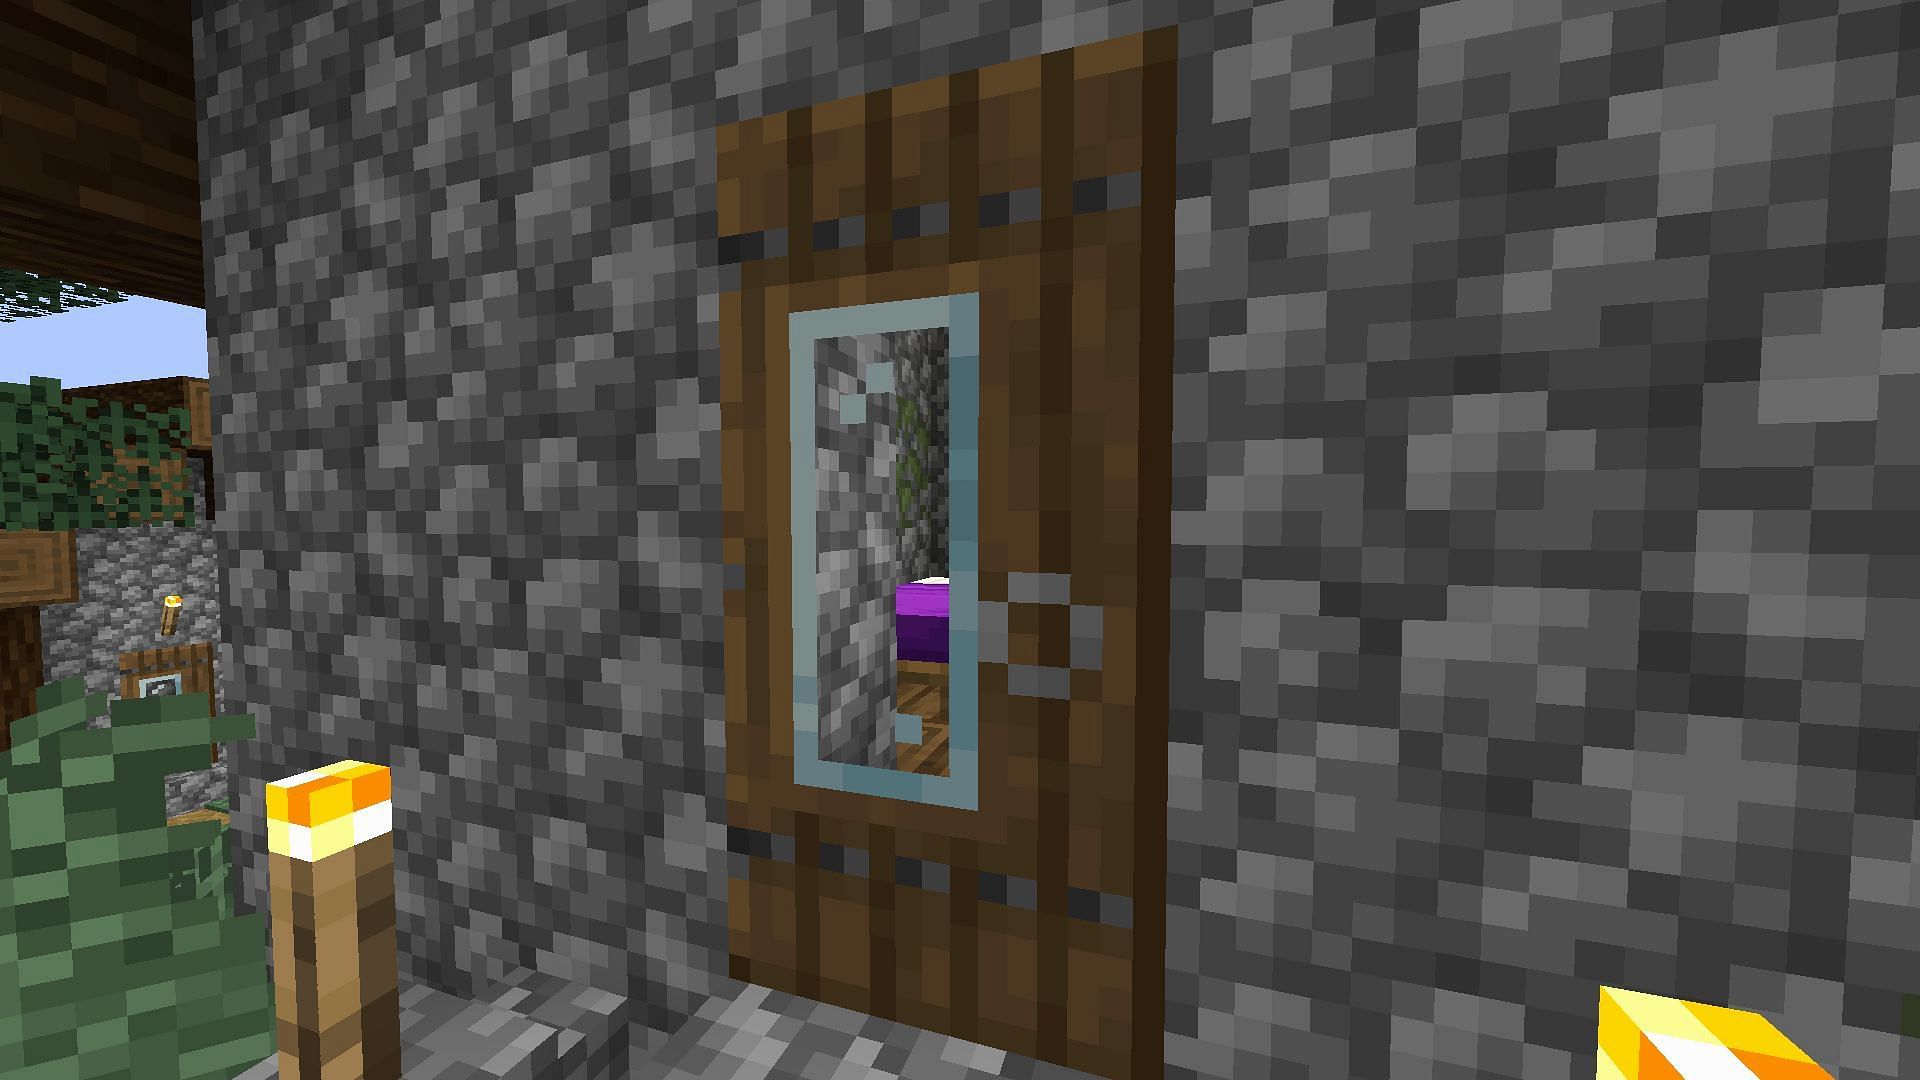 Glass panes on doors are a brilliant way to uniquely decorate structures in Minecraft (Image via Mojang)